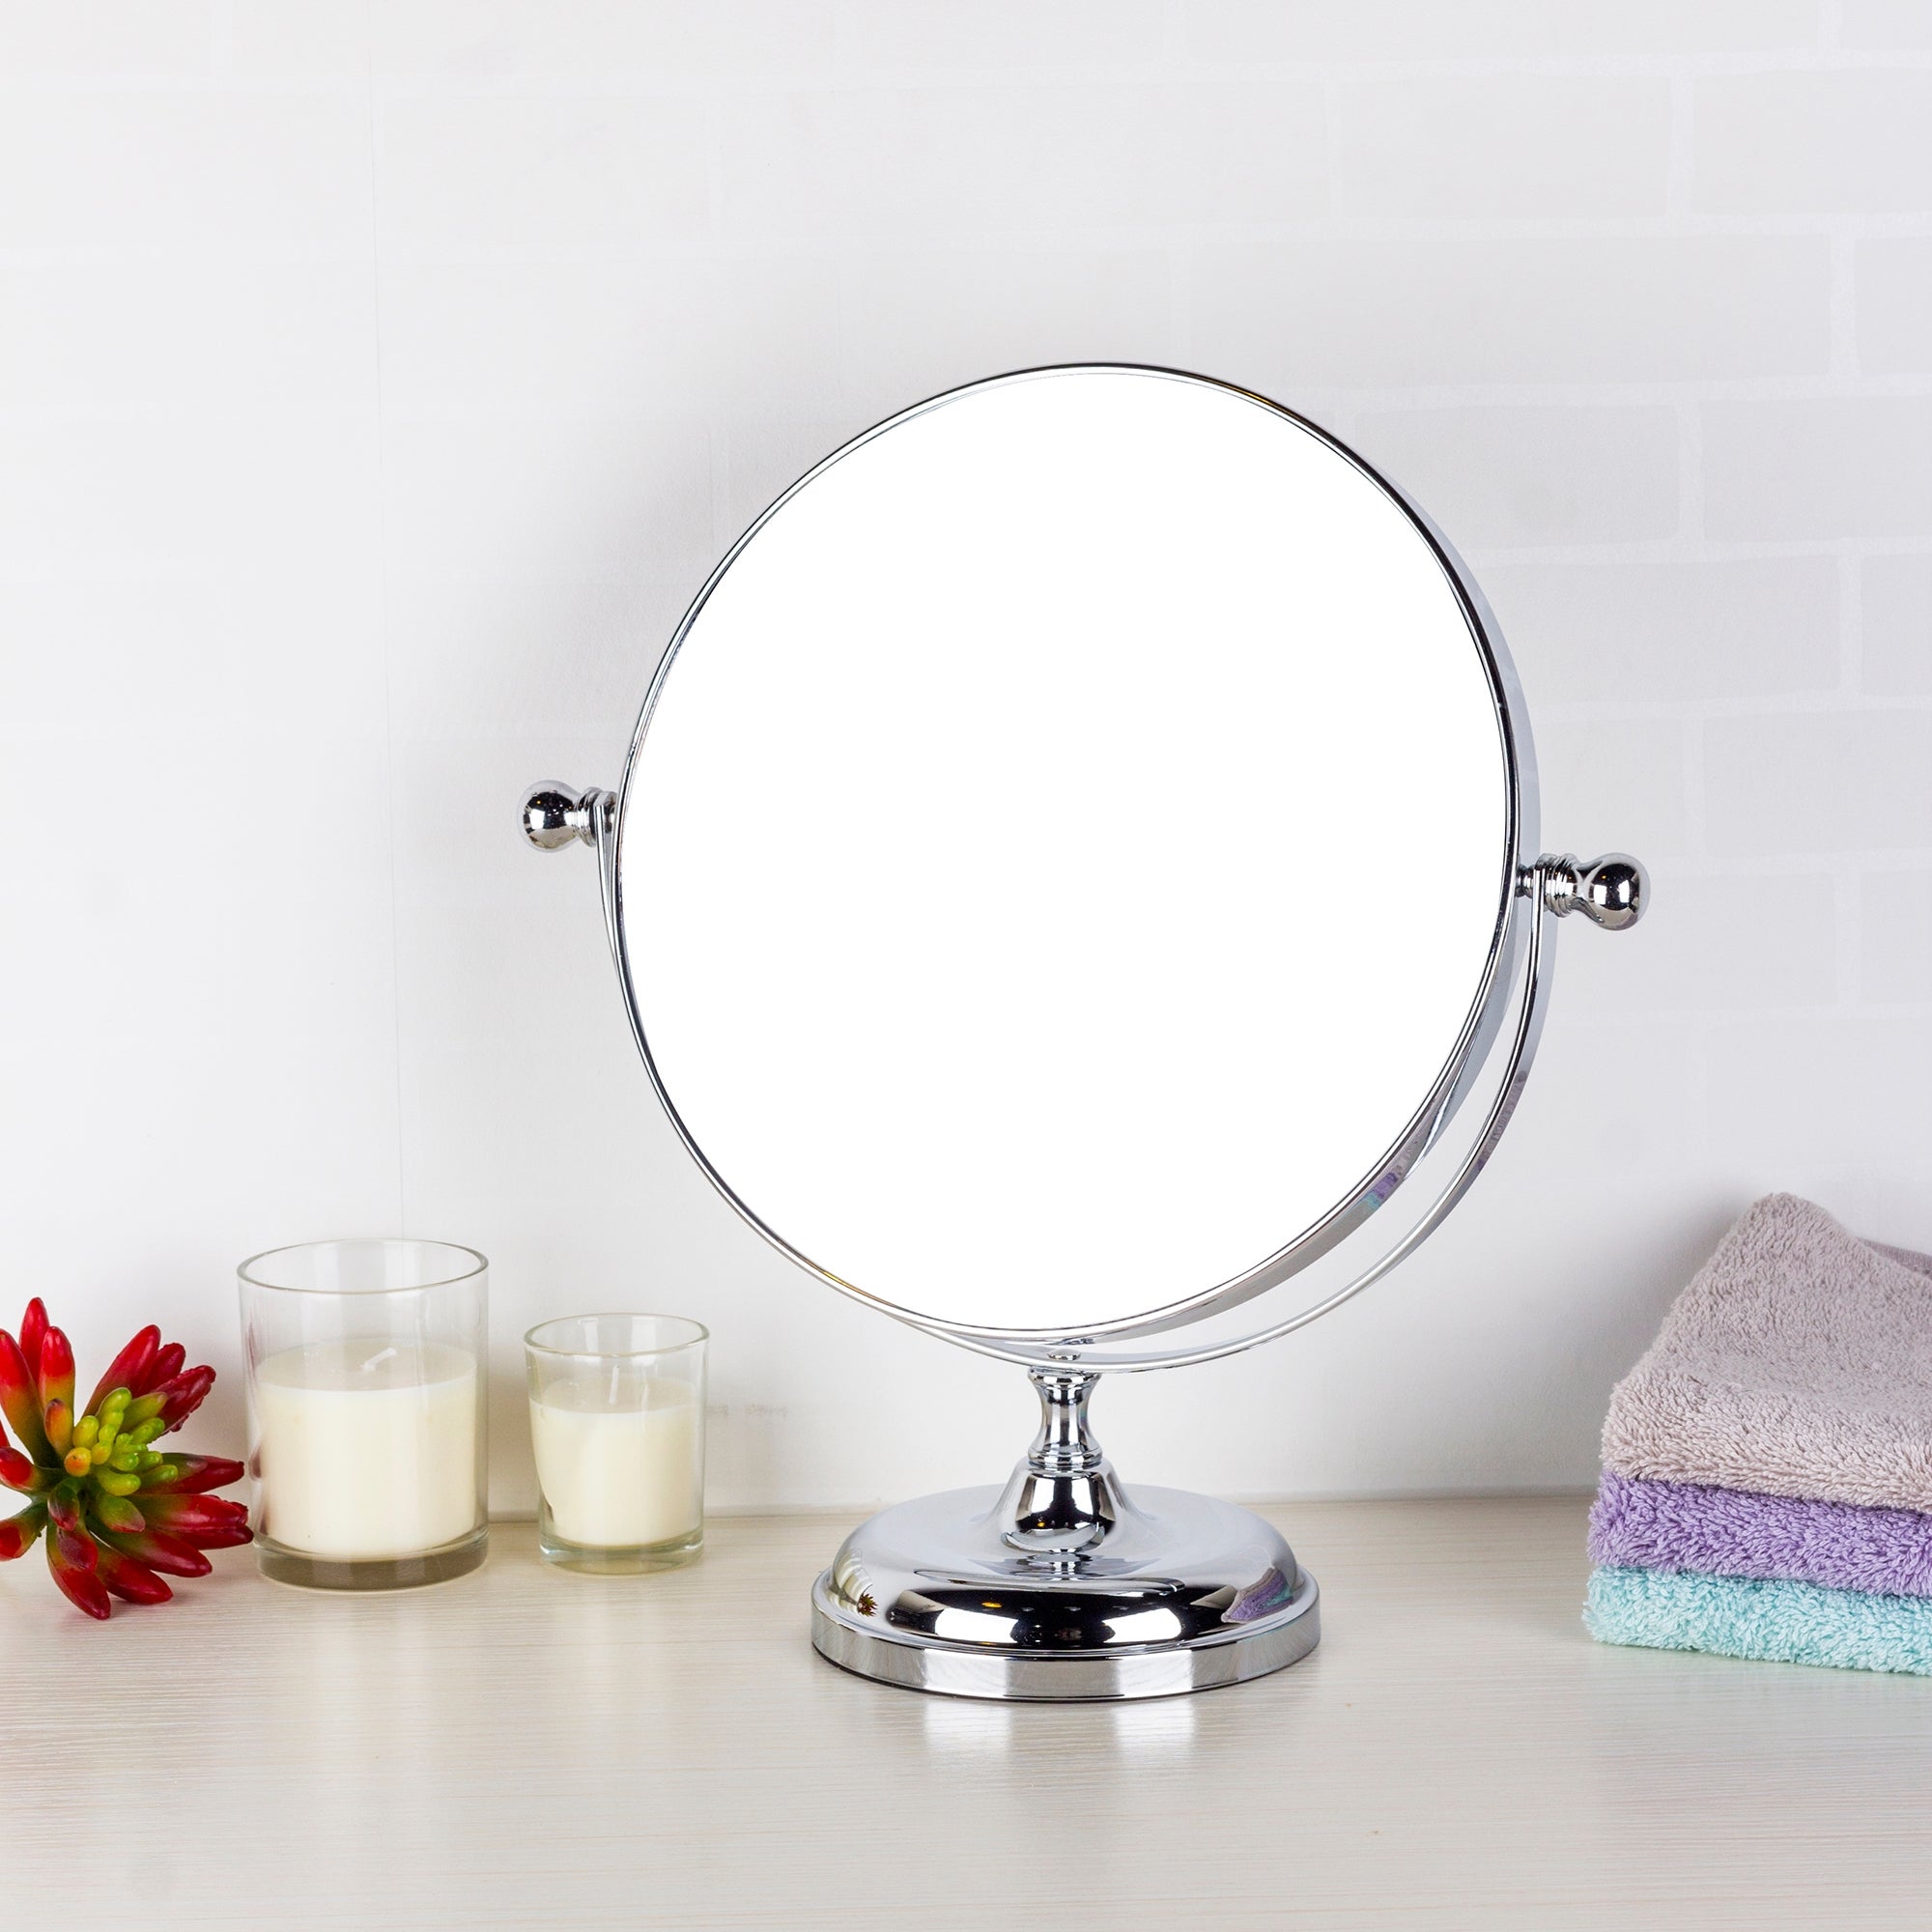 Oversized Chrome Free Standing Dressing Table Mirror